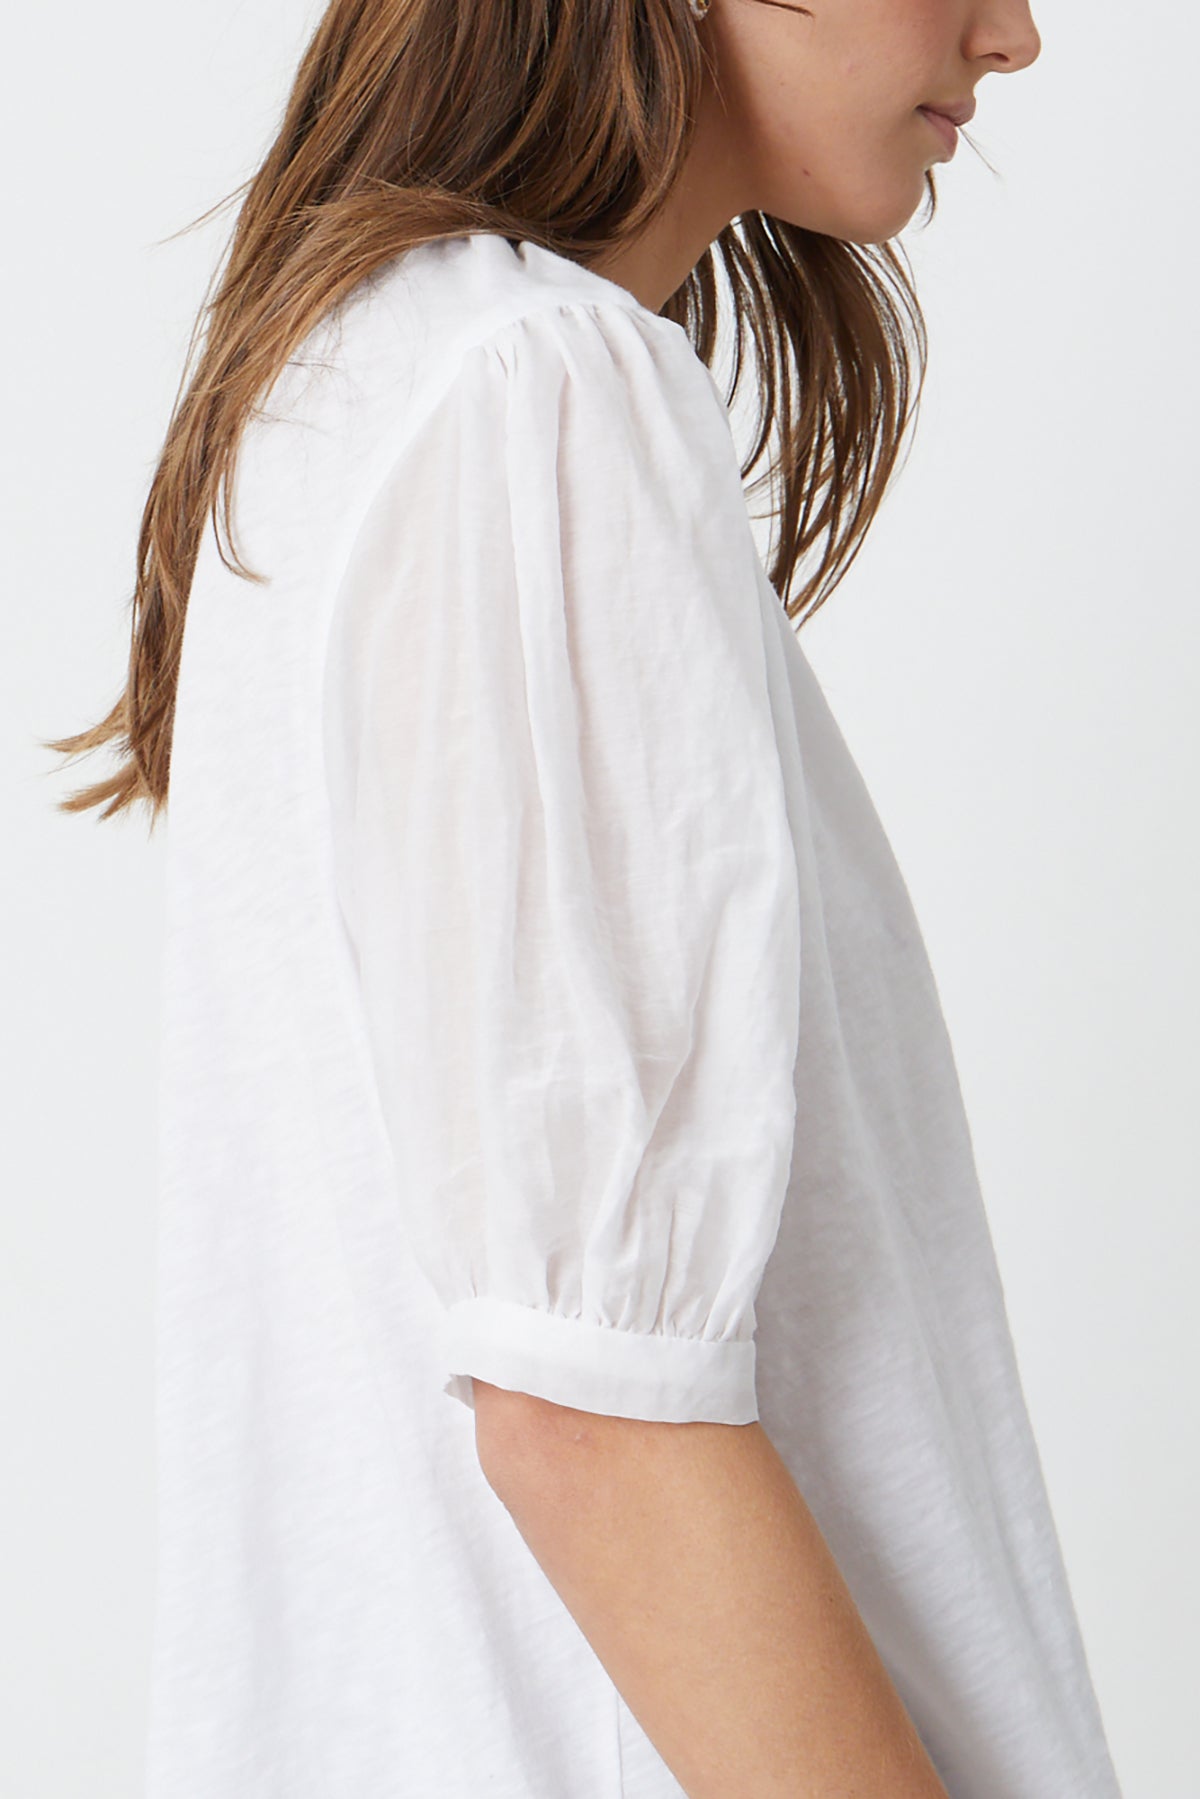 Mallory Top in white side detail with puff sleeve-26255715467457